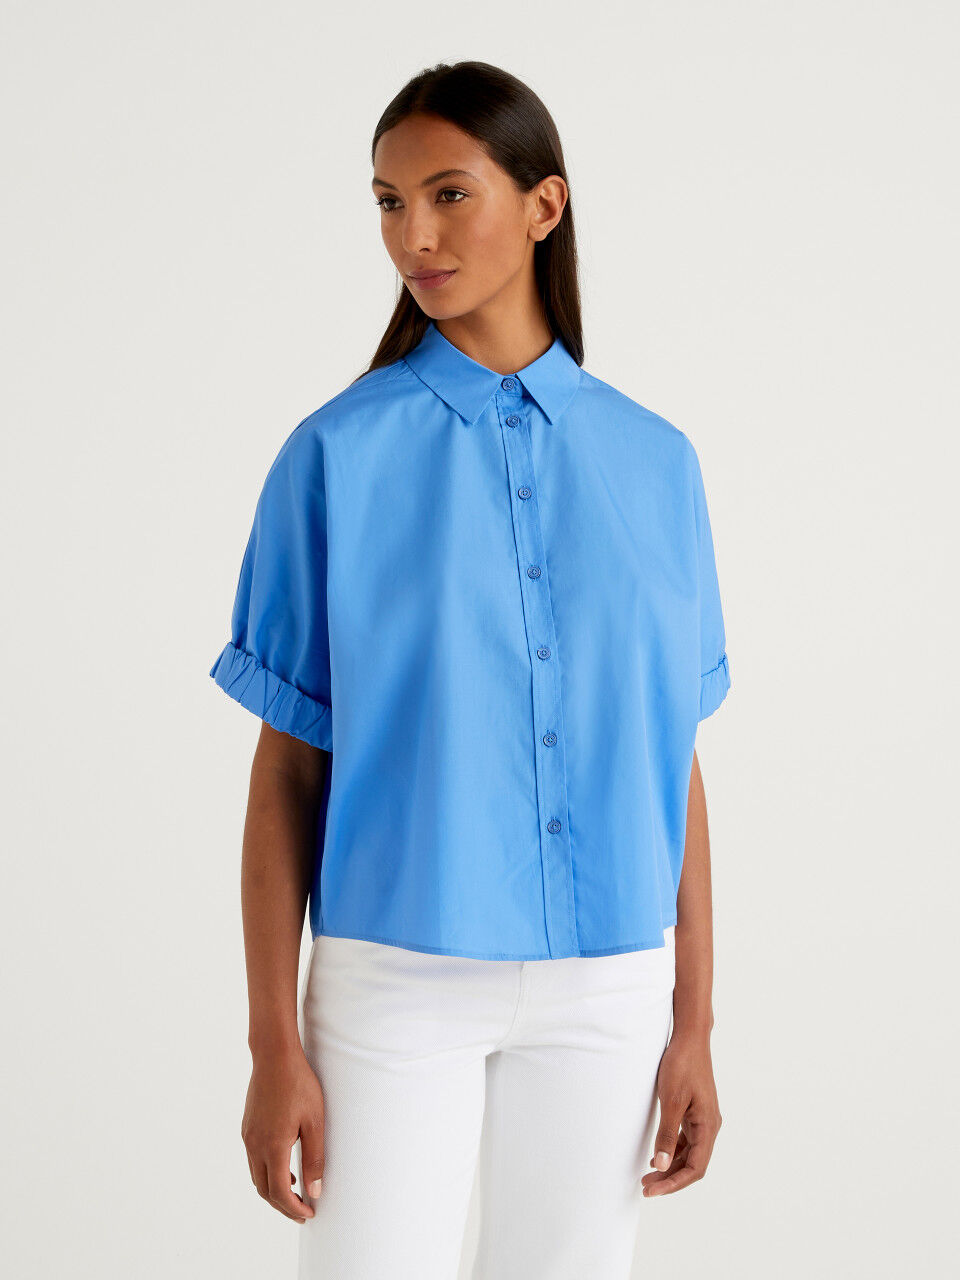 United Colors of Benetton Blusa Camisa para Mujer